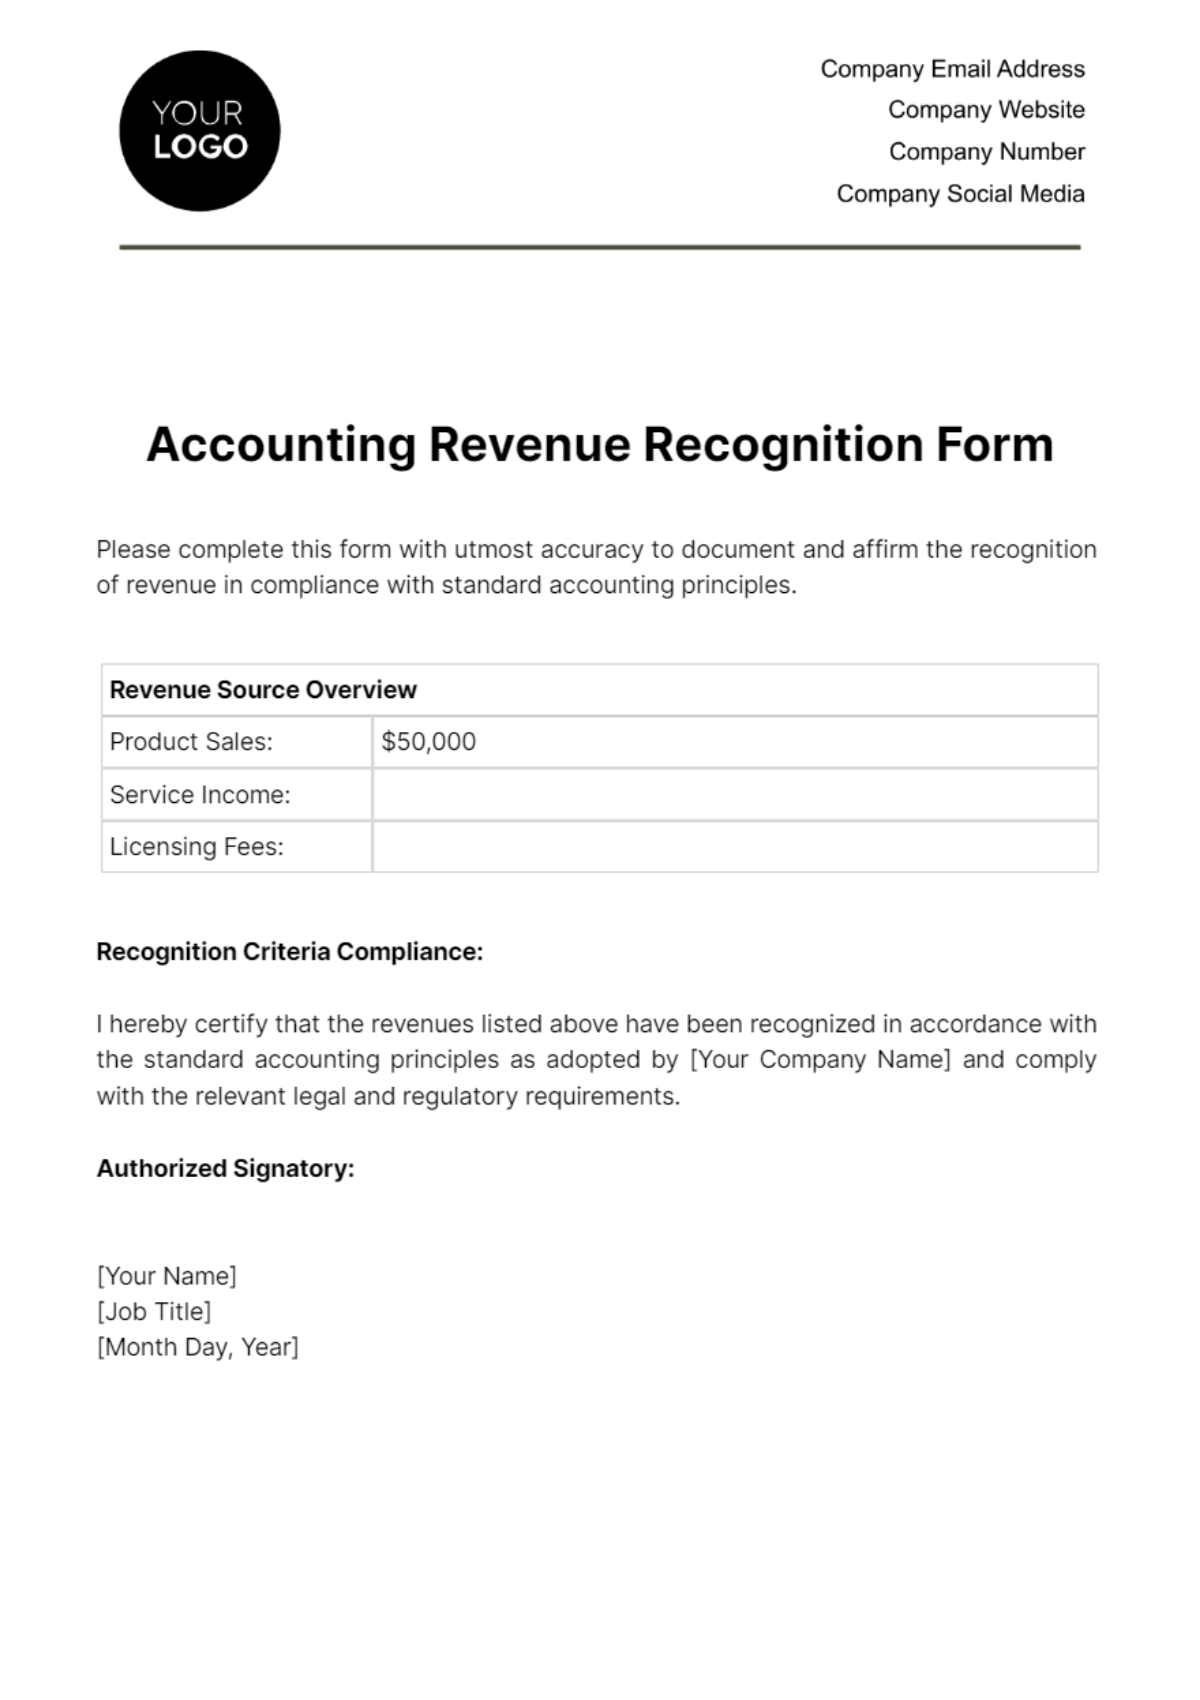 Accounting Revenue Recognition Form Template